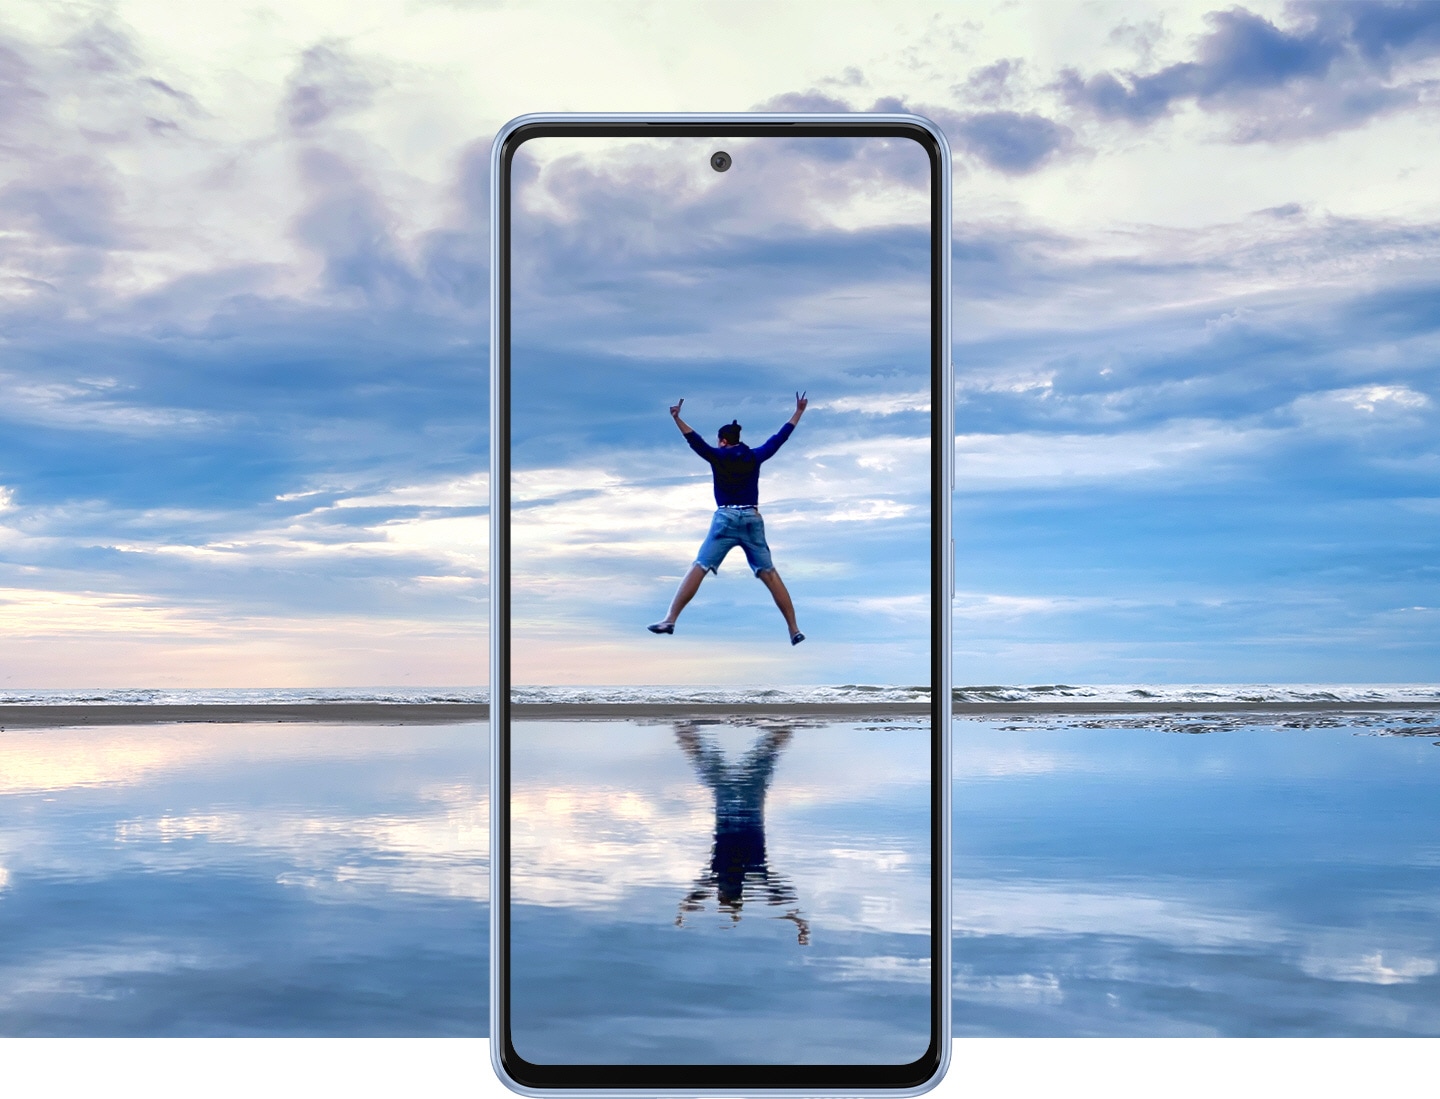 Galaxy A53 5G seen from the front against a beautiful landscape that overlaps onto the screen. It shows an expansive sky over water that reflects it with a thin horizon dissecting near the middle. In the center of the screen, a man is jumping in the air with all four limps outstretched and his reflection is shown on the water.